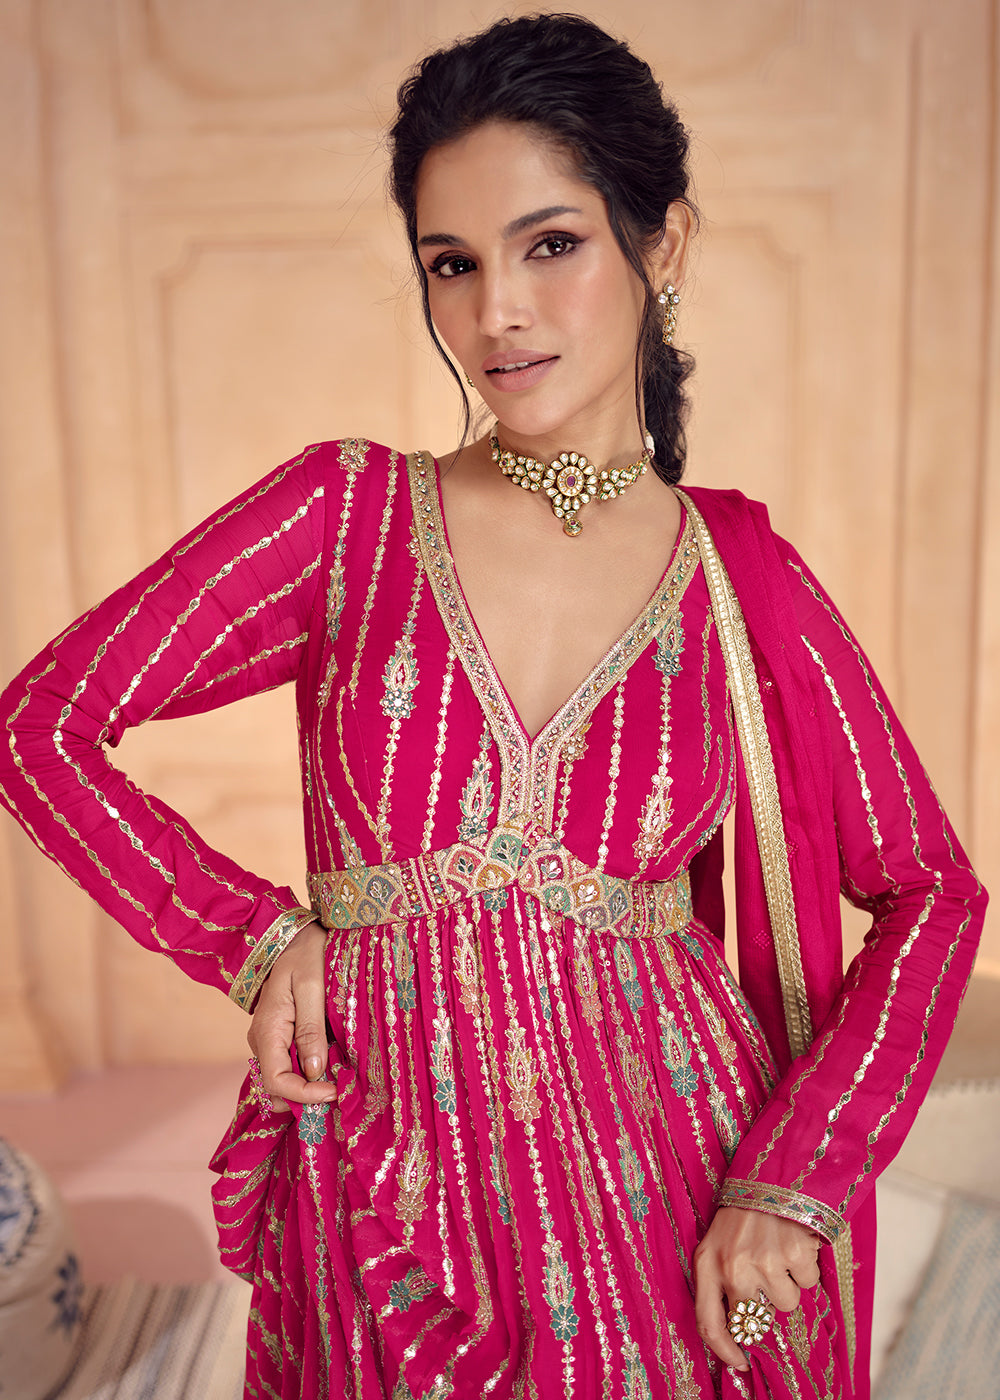 Buy Now Hot Pink Georgette Embroidered Long Anarkali Gown Online in USA, UK, Australia, Canada & Worldwide at Empress Clothing. 